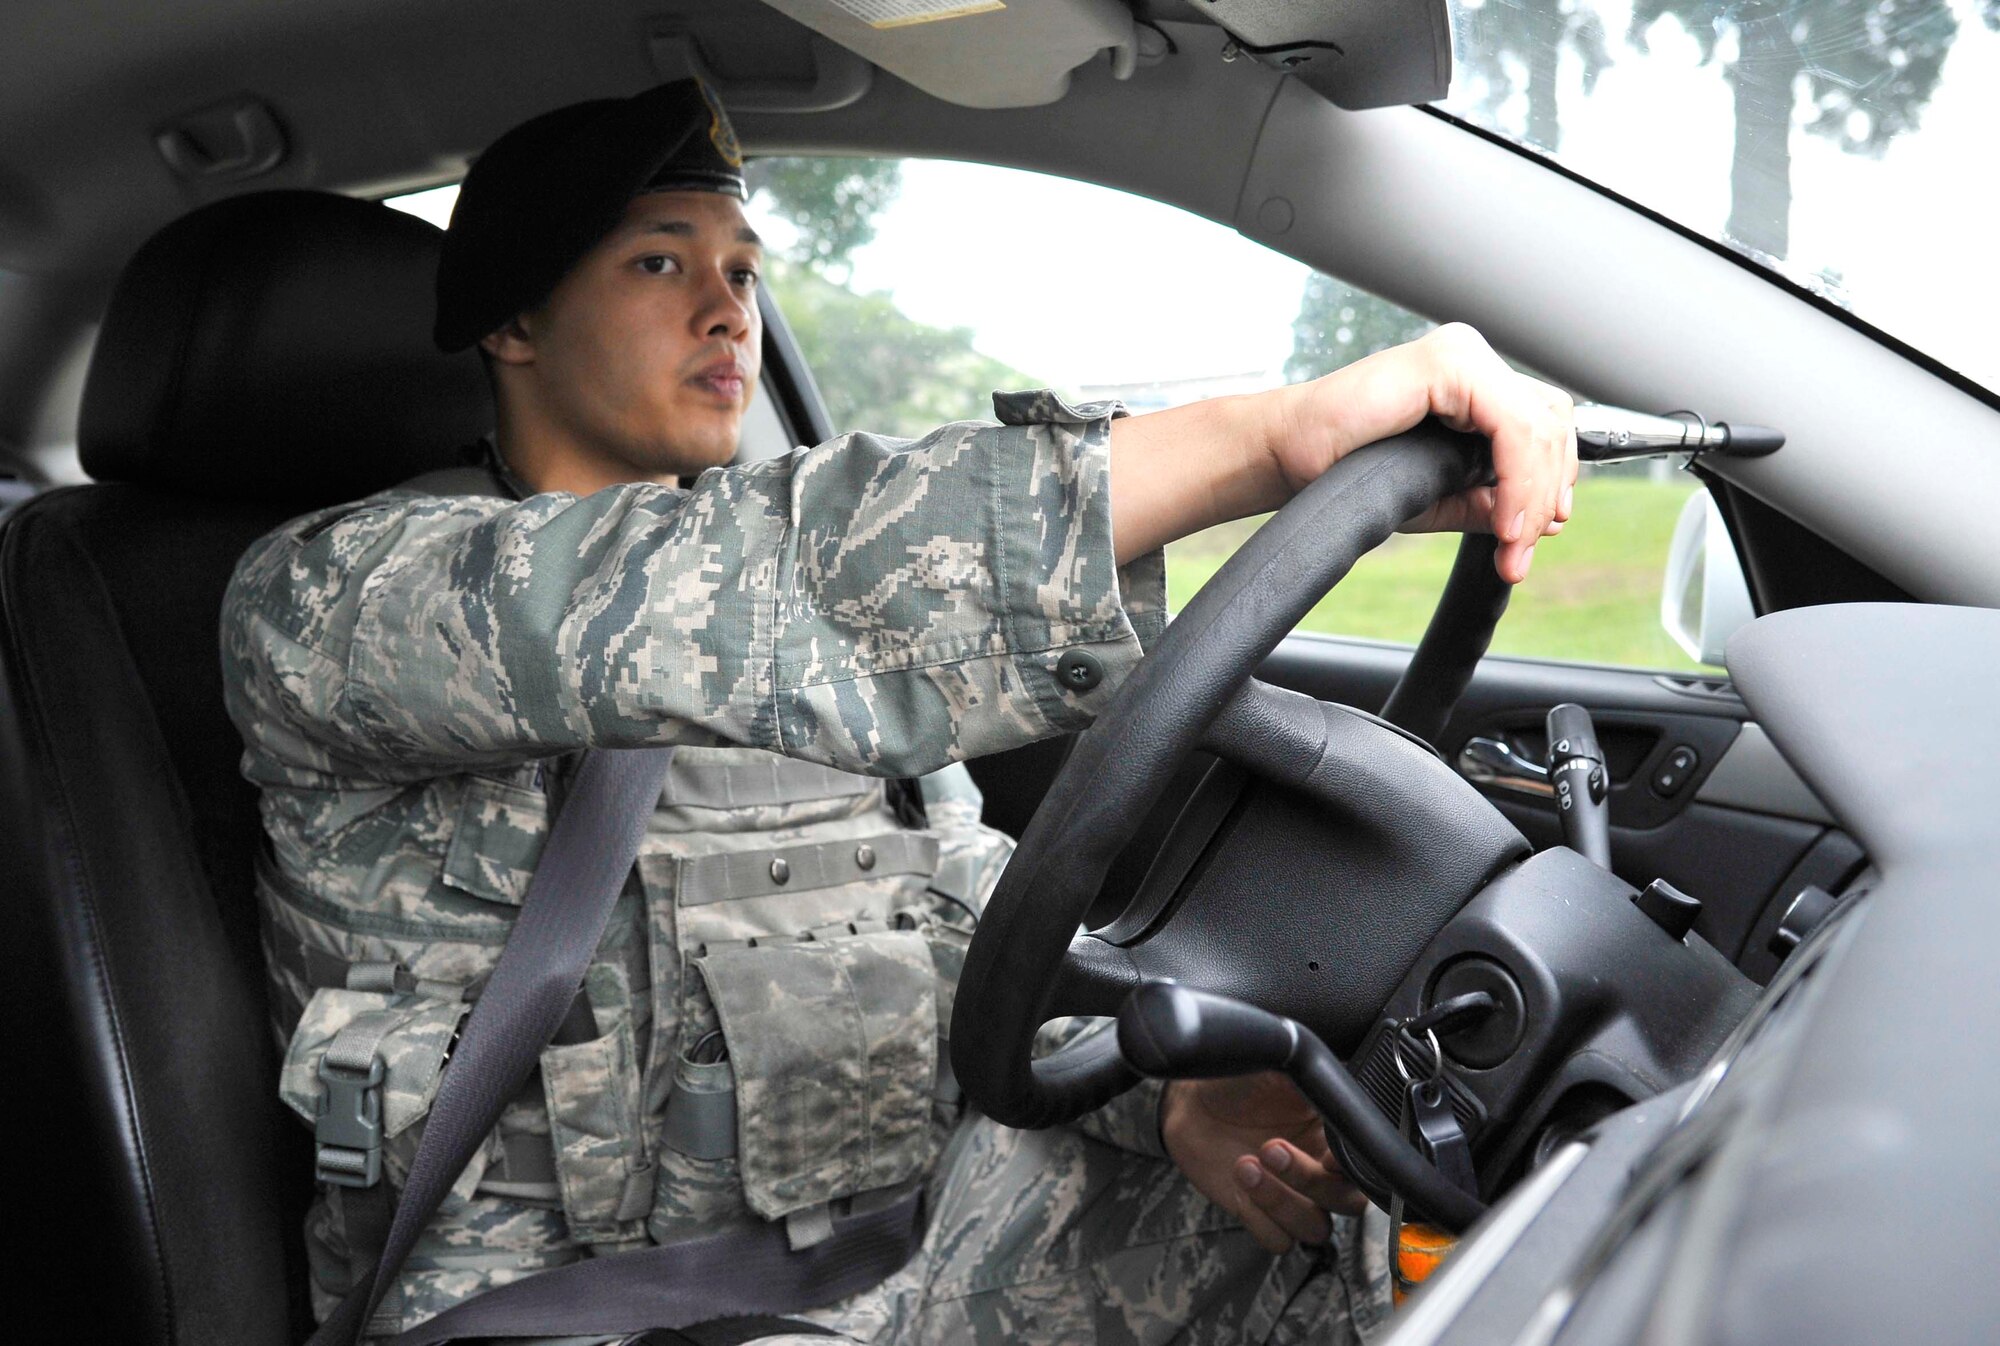 U.S. Air Force Senior Airman William Beasley, 35th Security Forces Squadron base defense operations controller, responds to an accident scene at Misawa Air Base, Japan, Sept. 2, 2014. As a controller, Beasley remains in constant contact with the 35 SFS dispatcher during patrol and reports incidents and information to the base defense operations center. (U.S. Air Force photo by Airman 1st Class Patrick S. Ciccarone) 